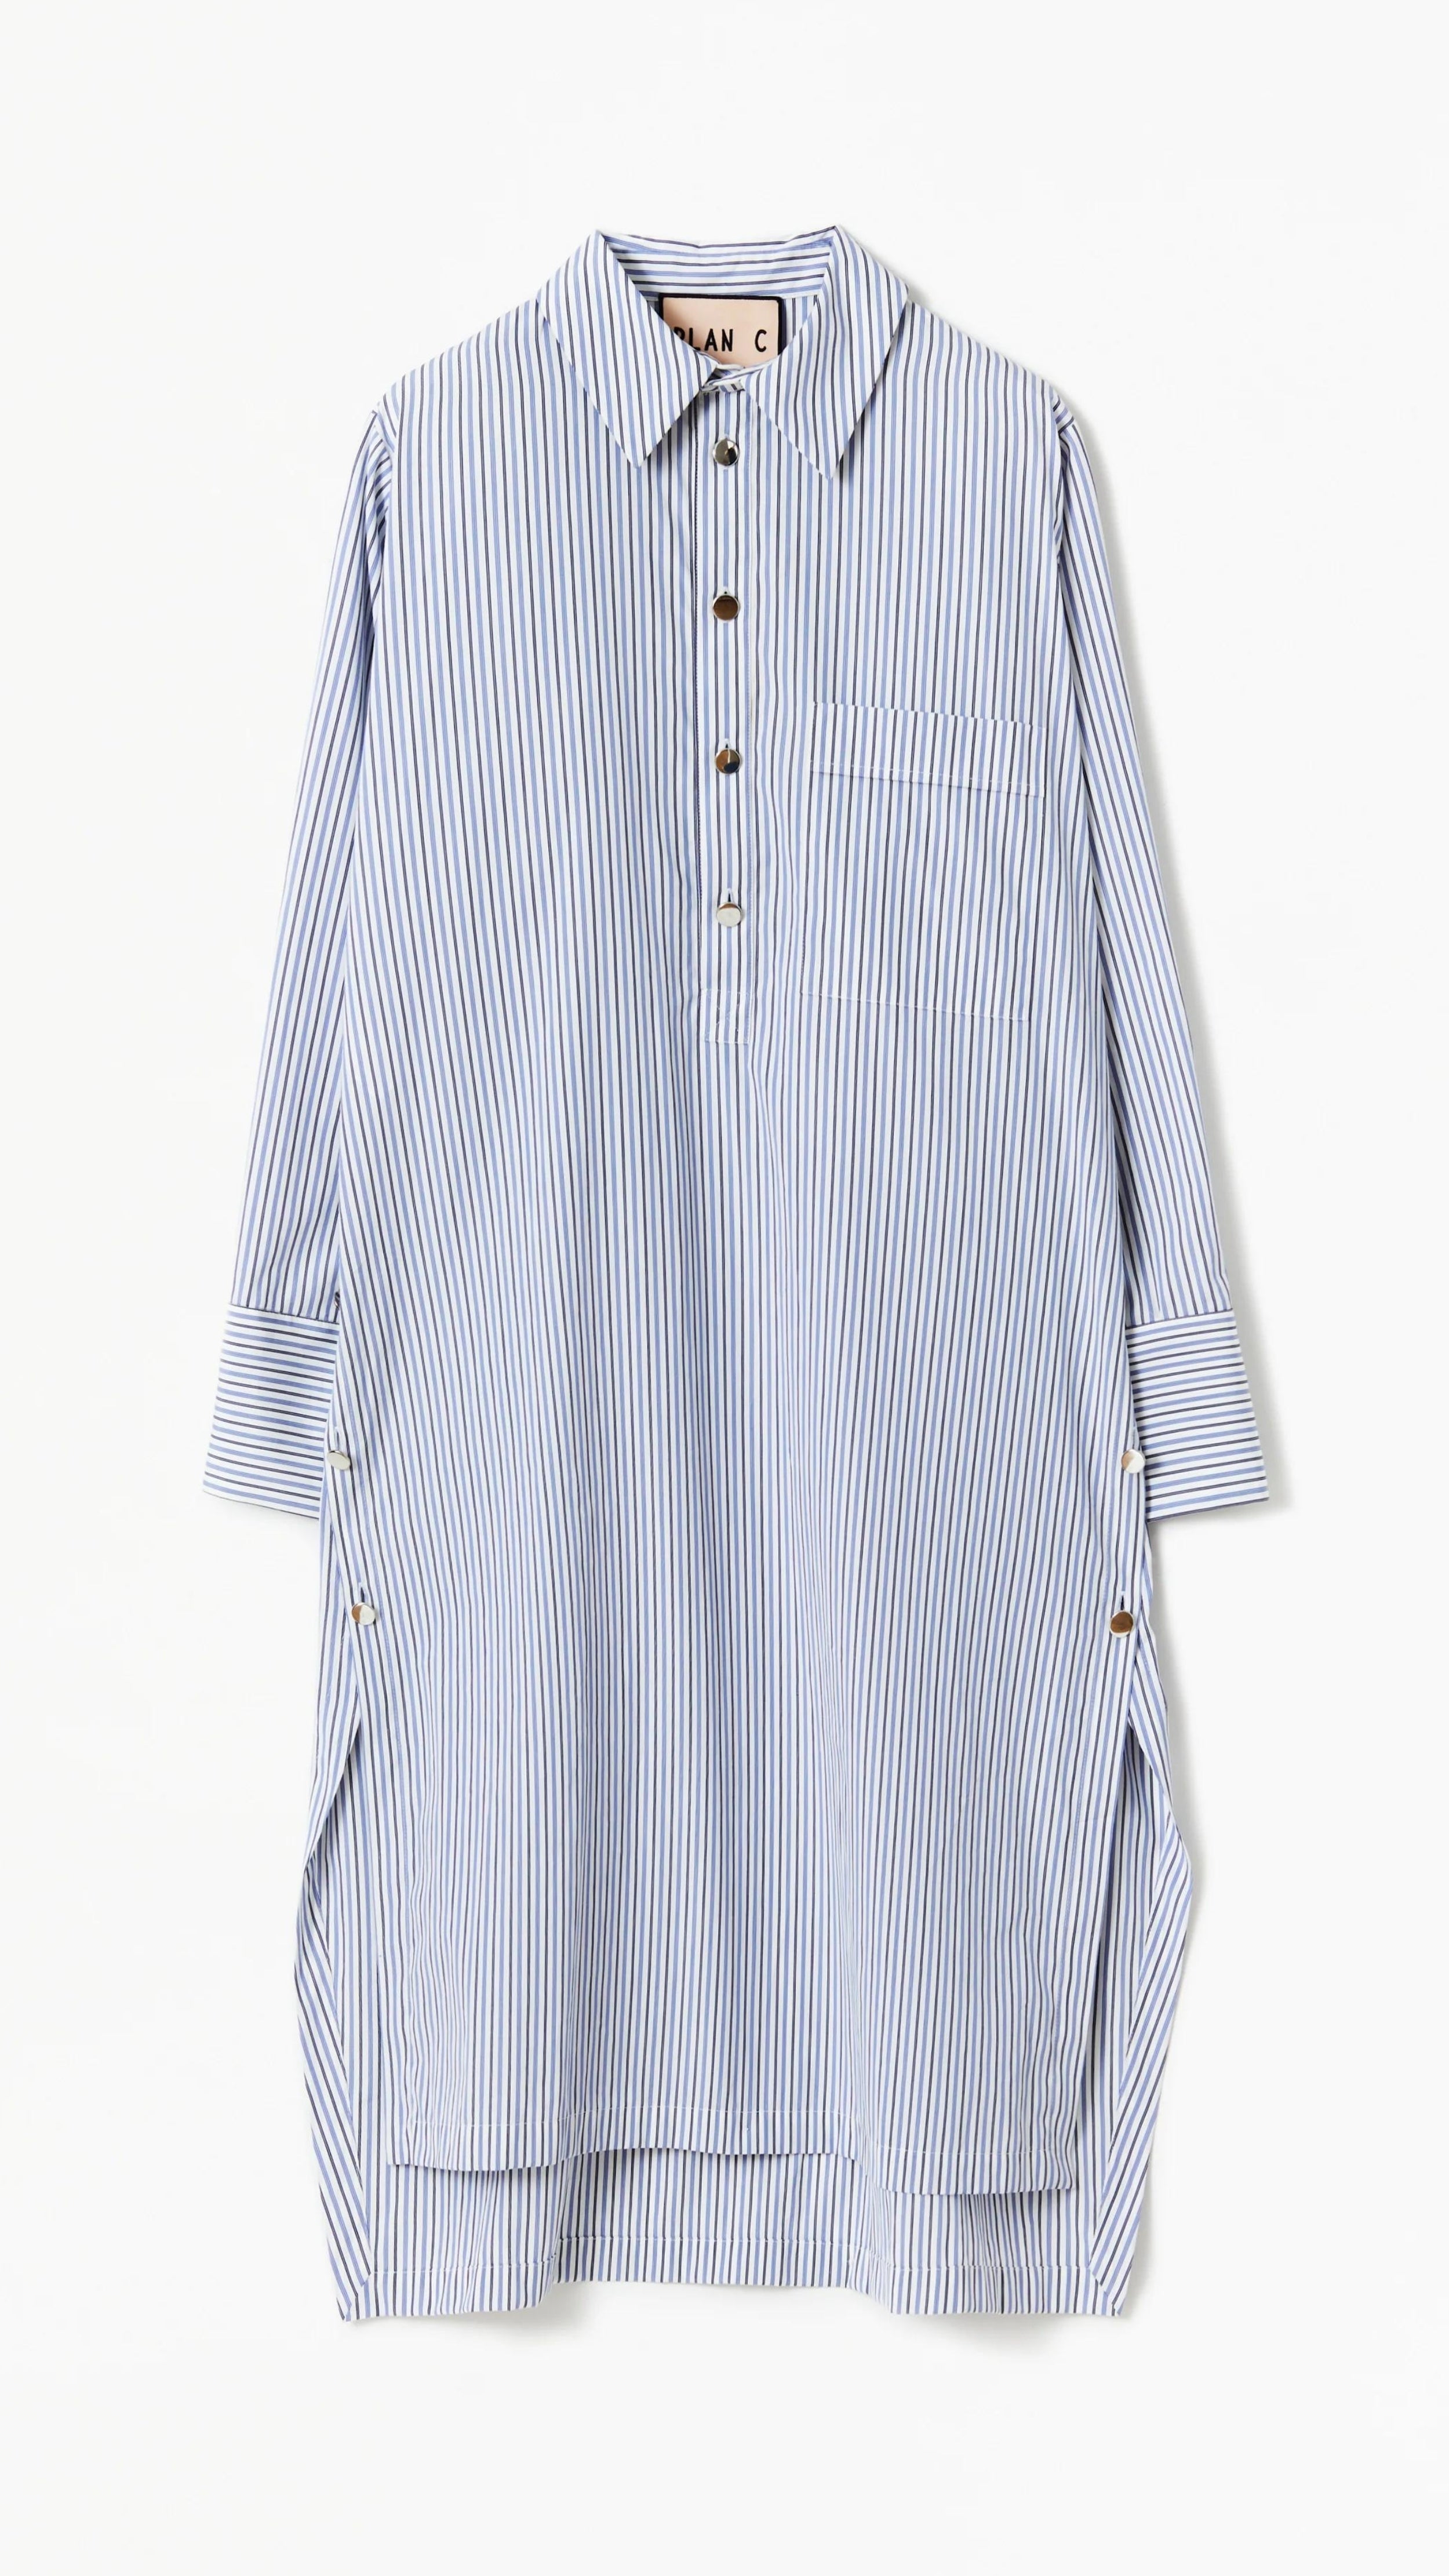 Plan C Striped Cotton Poplin Shirt Dress Classic yet modern shirt dress made from soft cotton poplin in pale blue and white stripes. It has three silver buttons, a collared neckline, long cuffs, and a breast pocket. It's designed with a relaxed fit and side pockets. Product flat photo of the front.